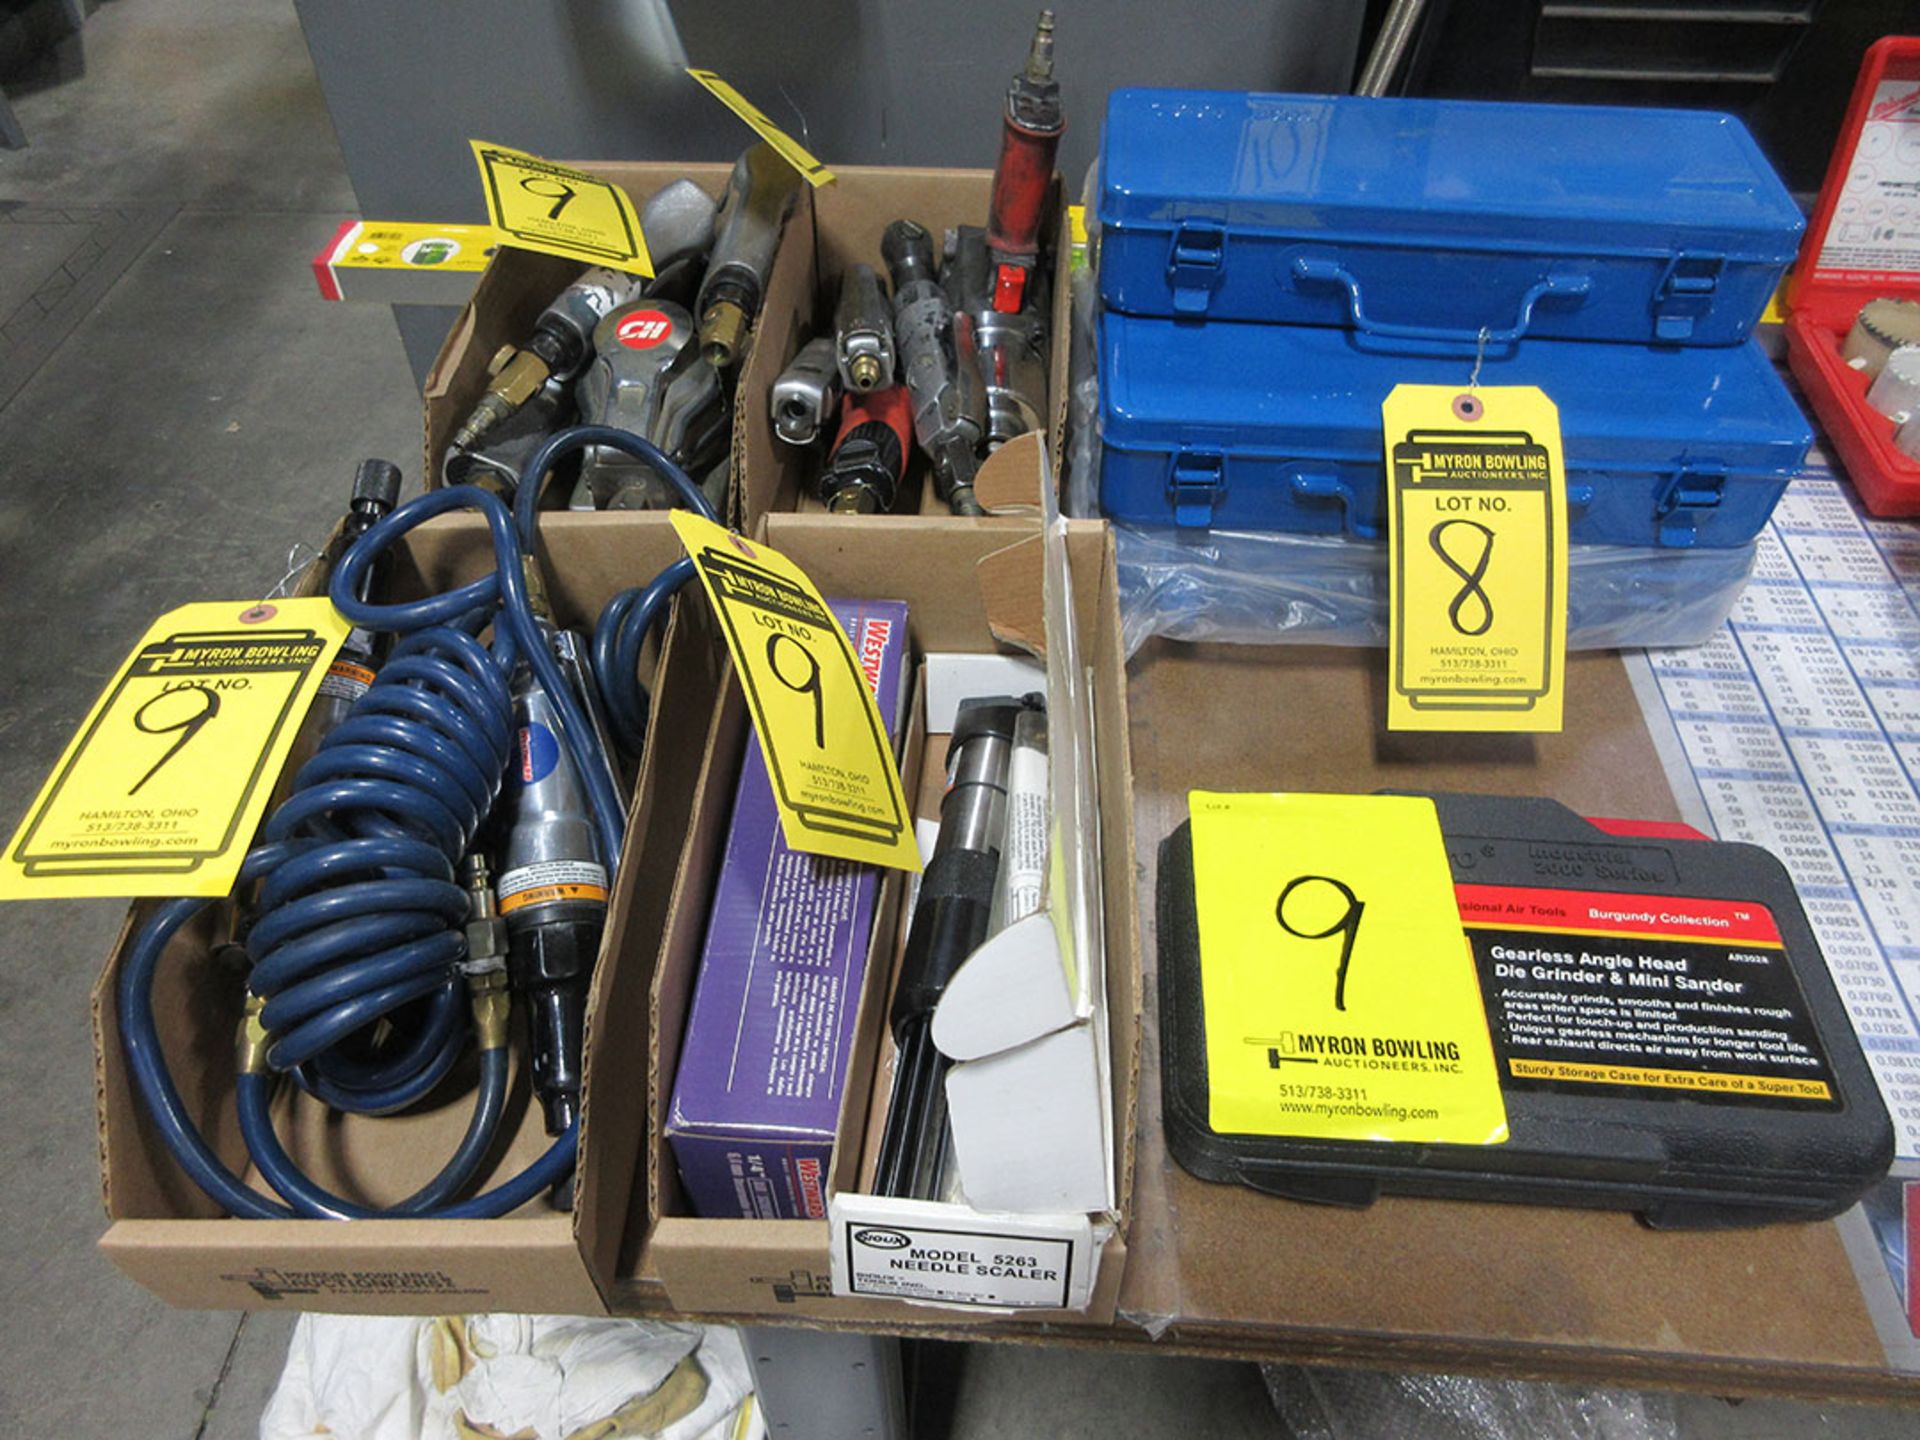 PNEUMATIC TOOLS; NEEDLE SCALER, PALM SANDER, DIE GRINDERS, AND WRENCHES